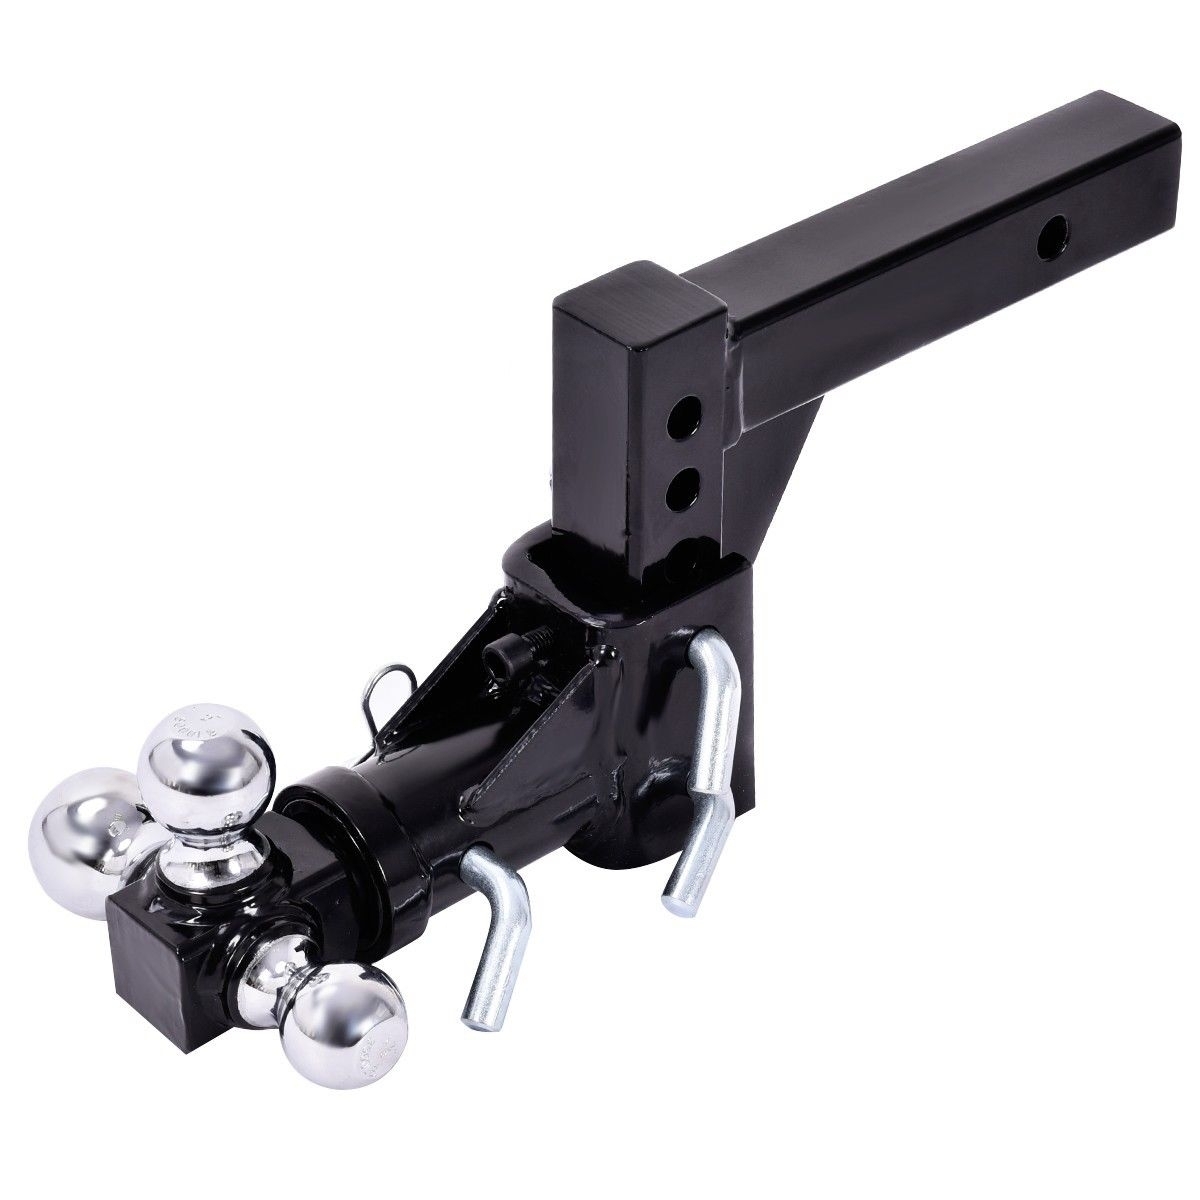 Triple Ball Swivel Adjustable Drop Turn Trailer Tow Hitch Mount For 2'' Receiver